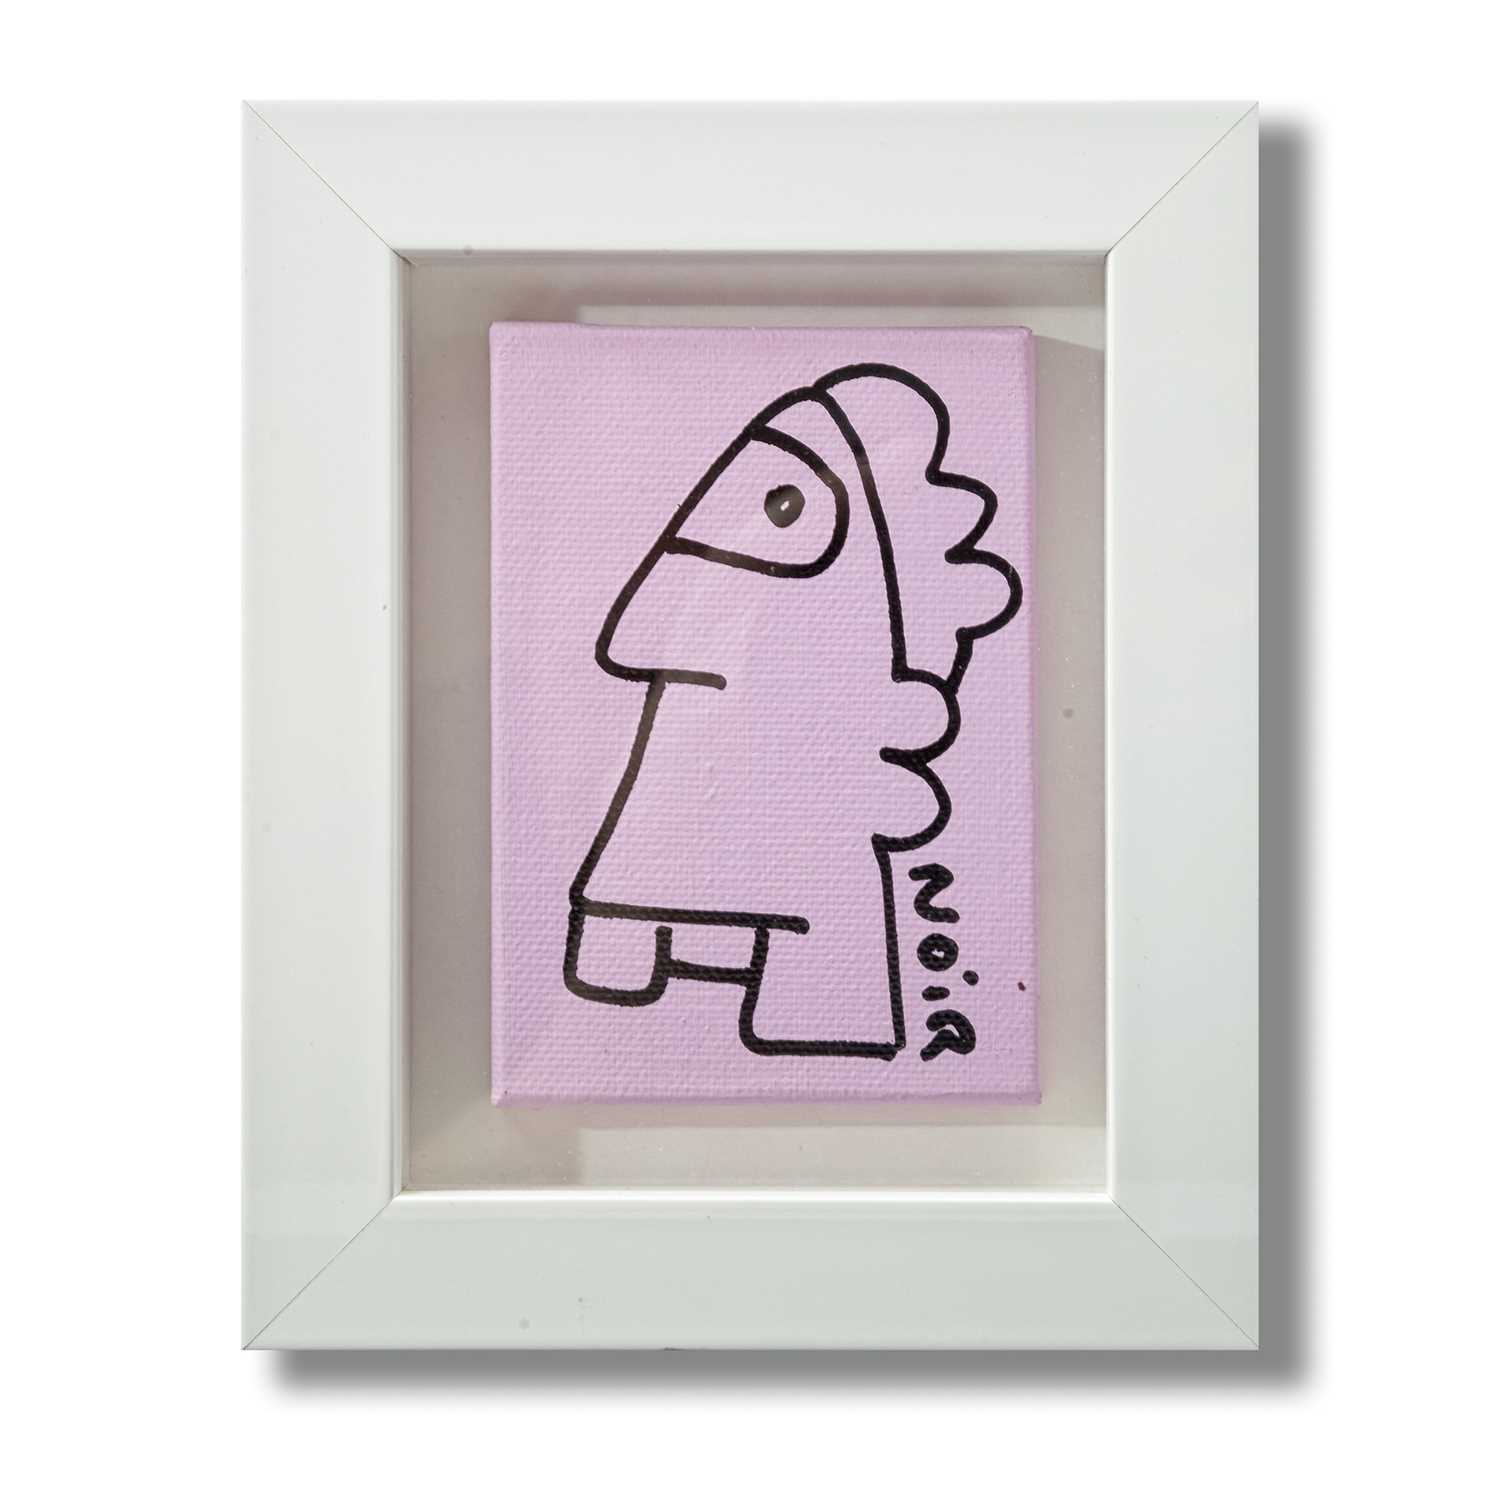 Lot 364 - Thierry Noir (French 1958-), 'Rose', 2016